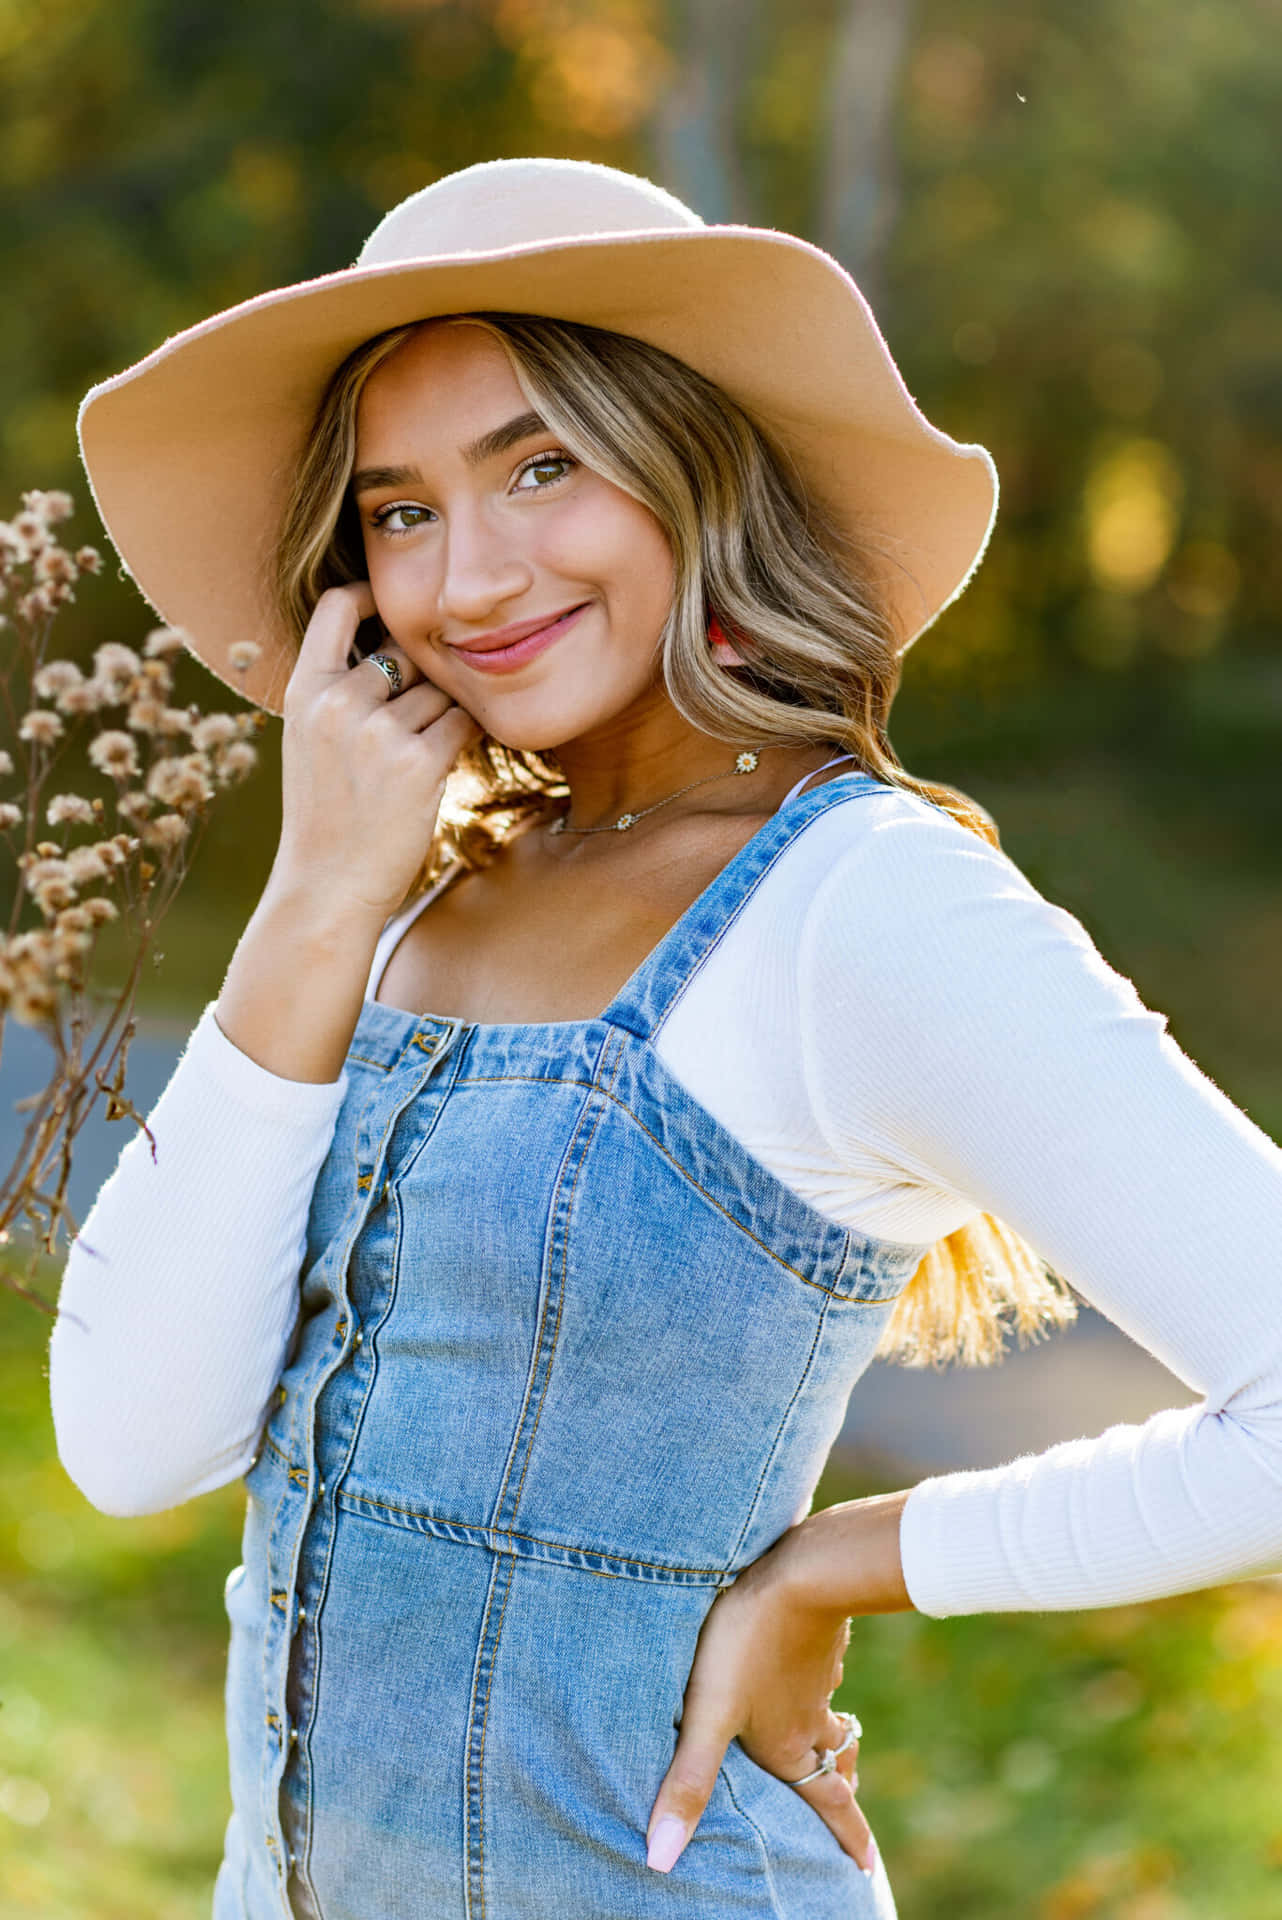 A Beautiful Woman In A Denim Overall Dress And Hat